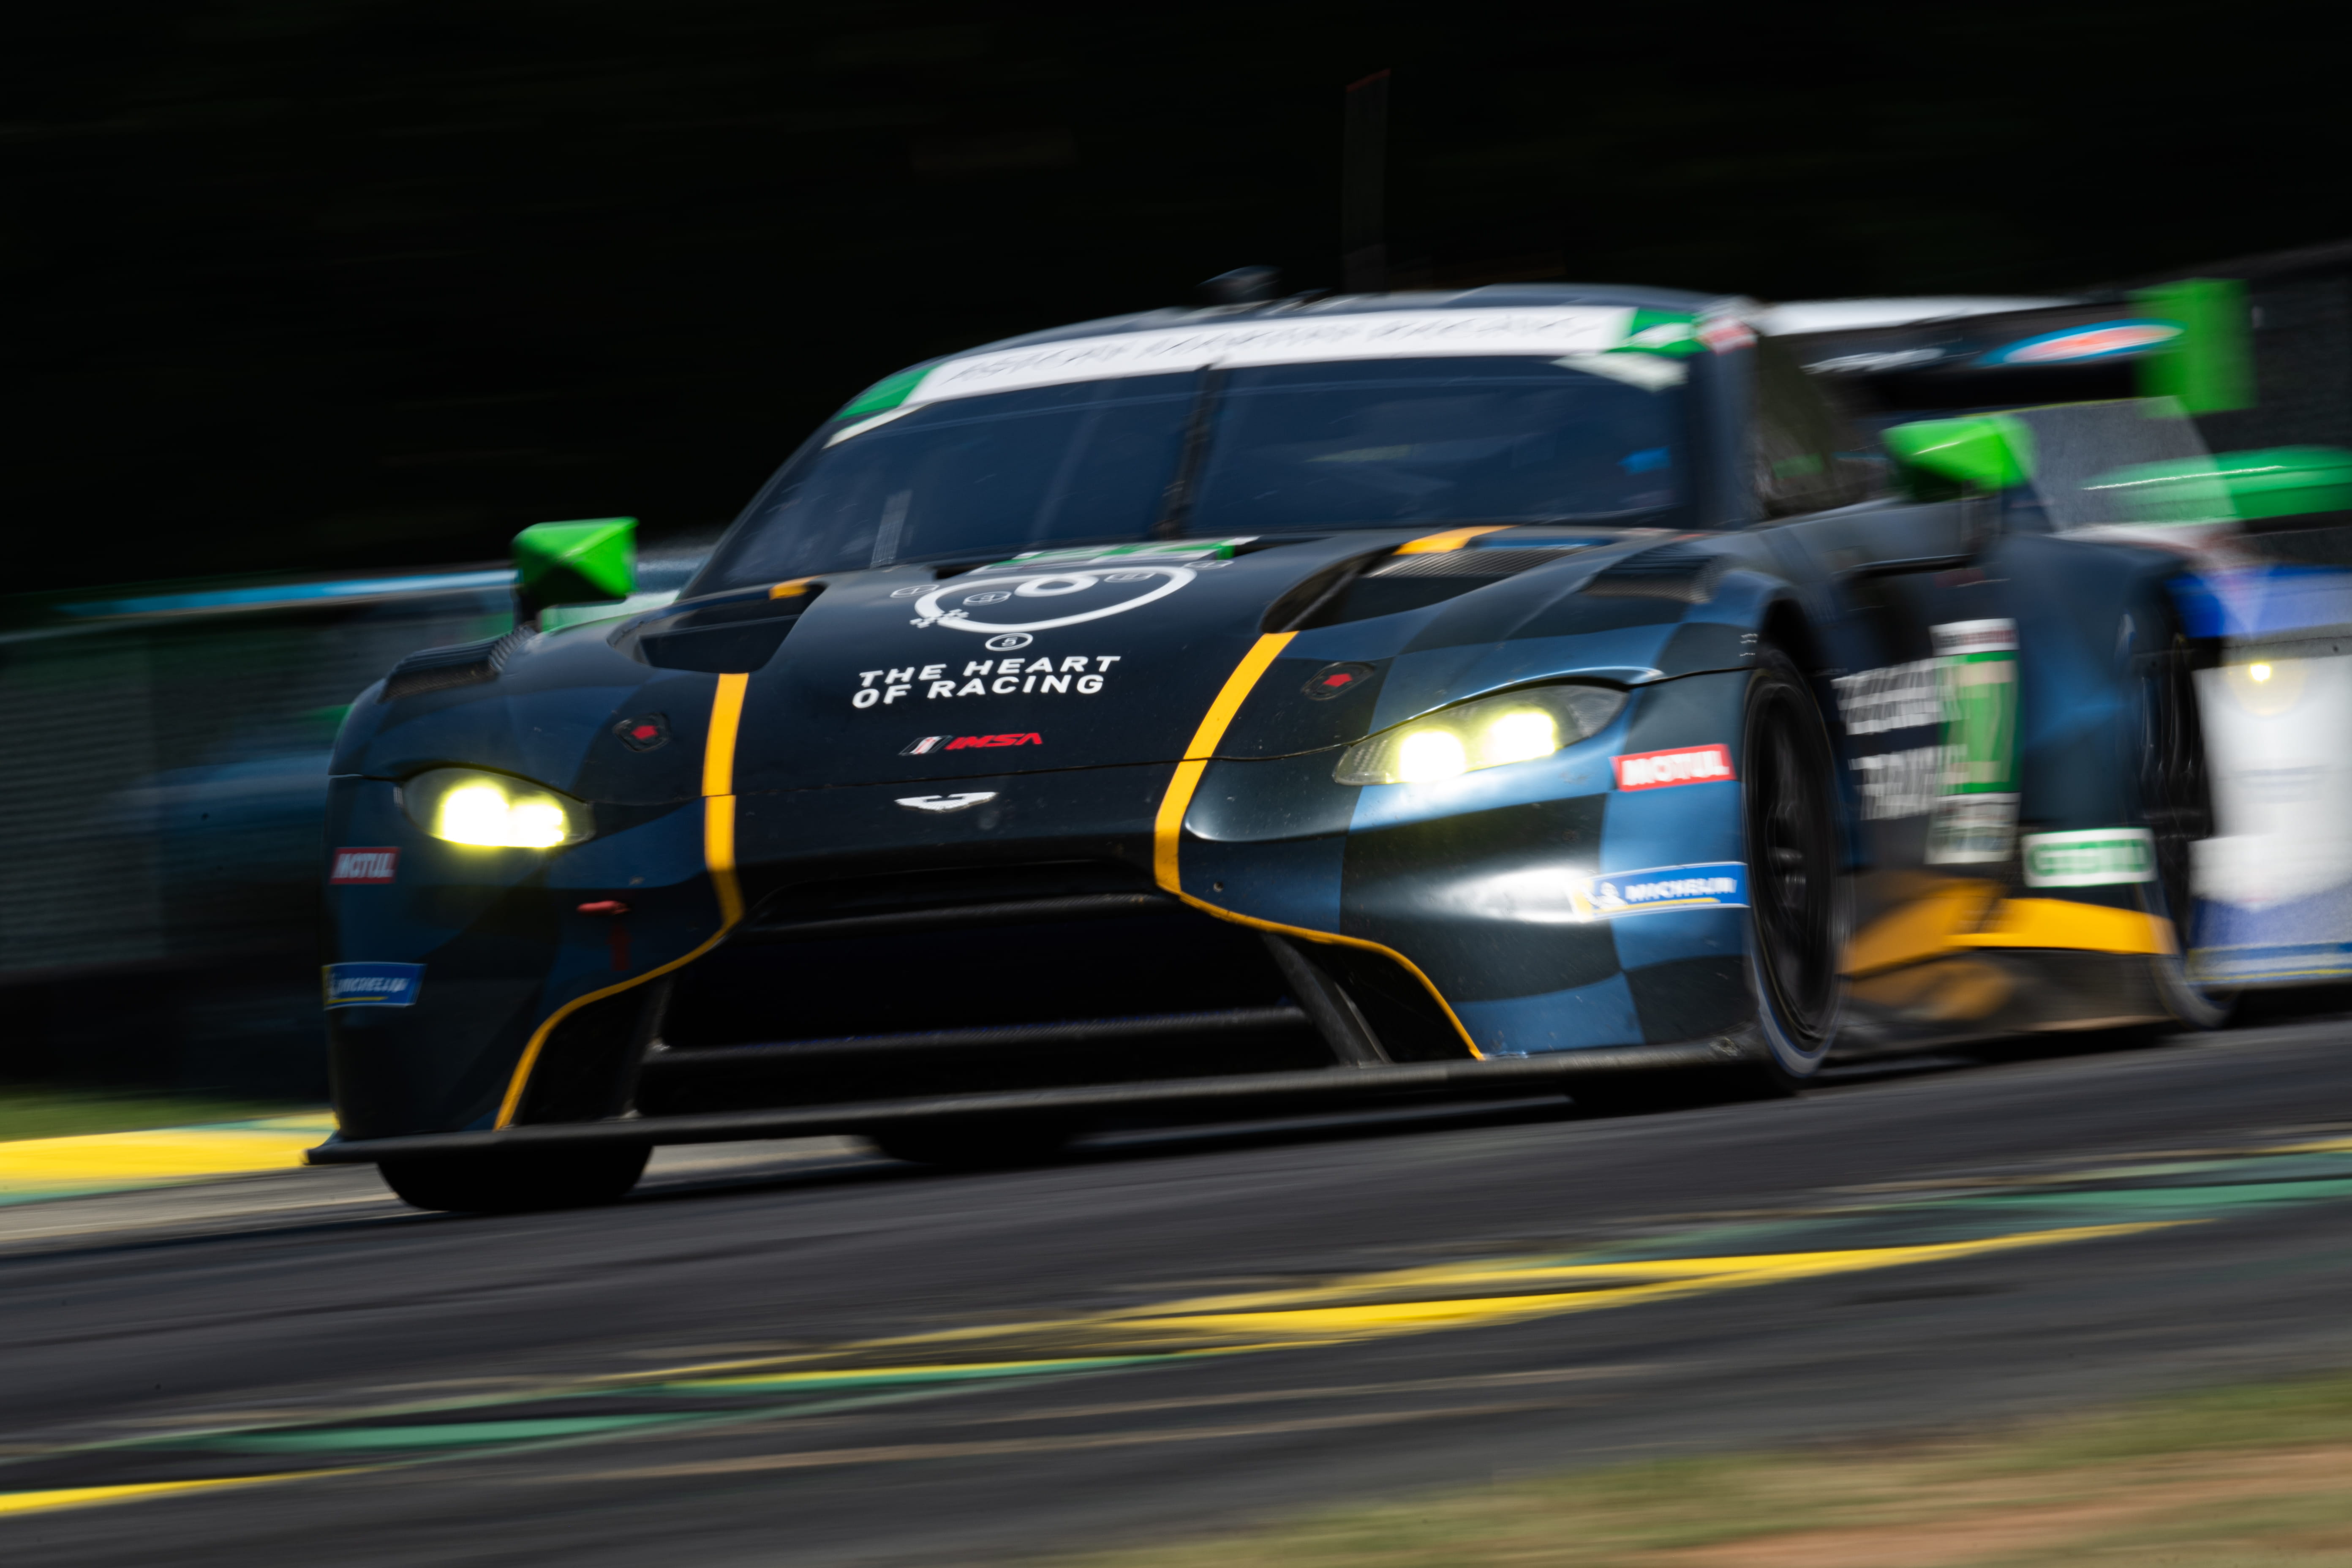 Aston Martin Vantage On The Brink Of History As The Heart Of Racing Team Seek Titles In Imsa Finale